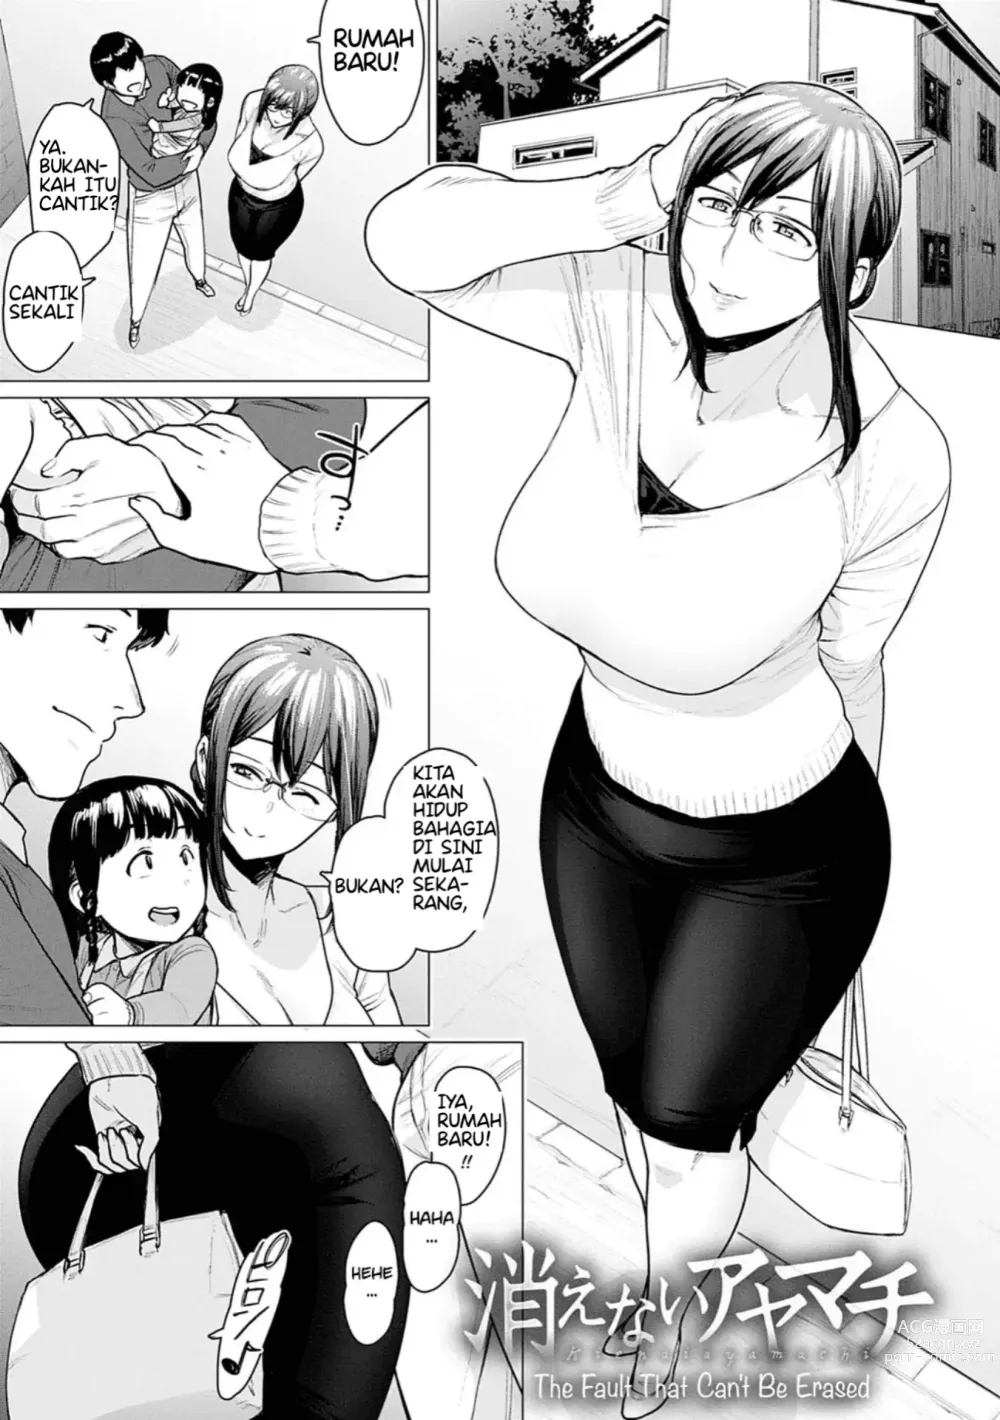 Page 2 of doujinshi The Fault That Can't Be Erased Indonesia